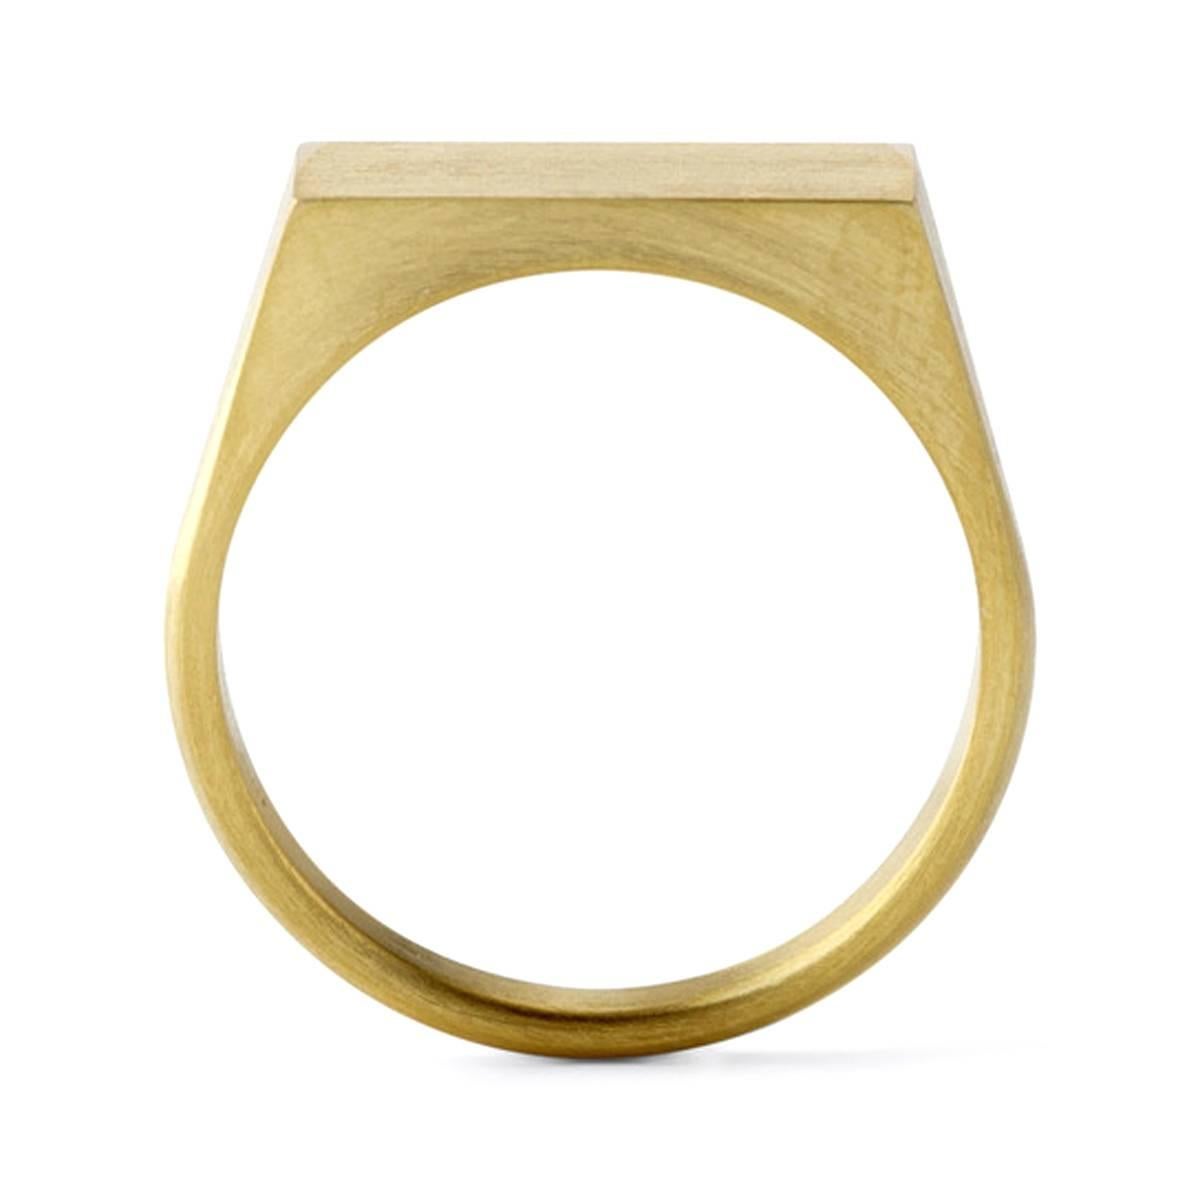 A classic rectangular signet ring made of 18 karat yellow gold. The signet surface and inside the ring band is polished in contrast with the surface of the ring band which is matte. 

Japan Size #3～#12
Signet top measurements: 14mm x 7.5mm
This item